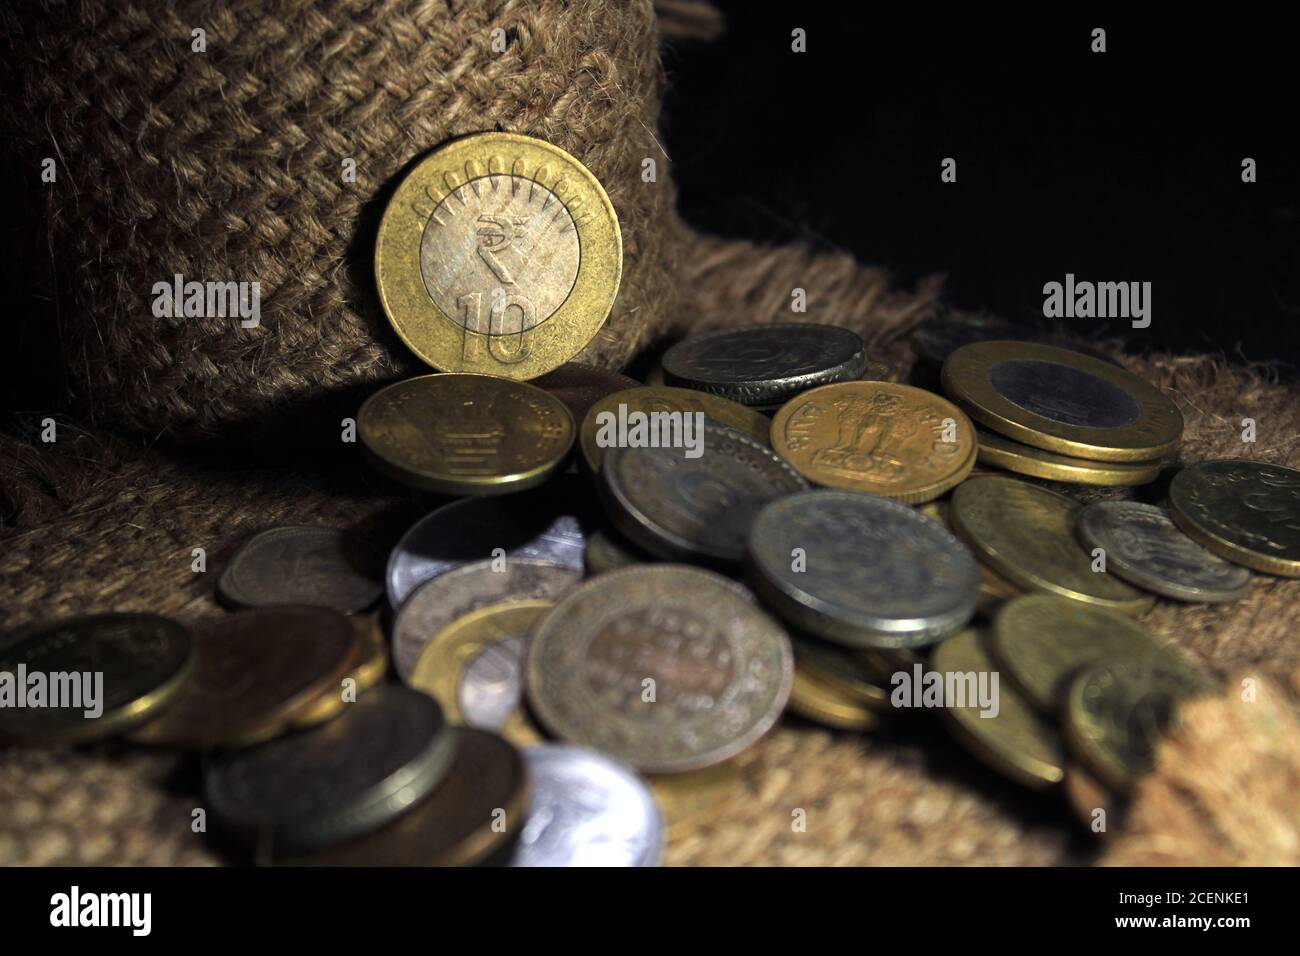 Stock pile of 1, 2, 5, 10 Indian rupee metal coin currency isolated on sack background. Financial, economy, Banking and exchange investment concept. Stock Photo